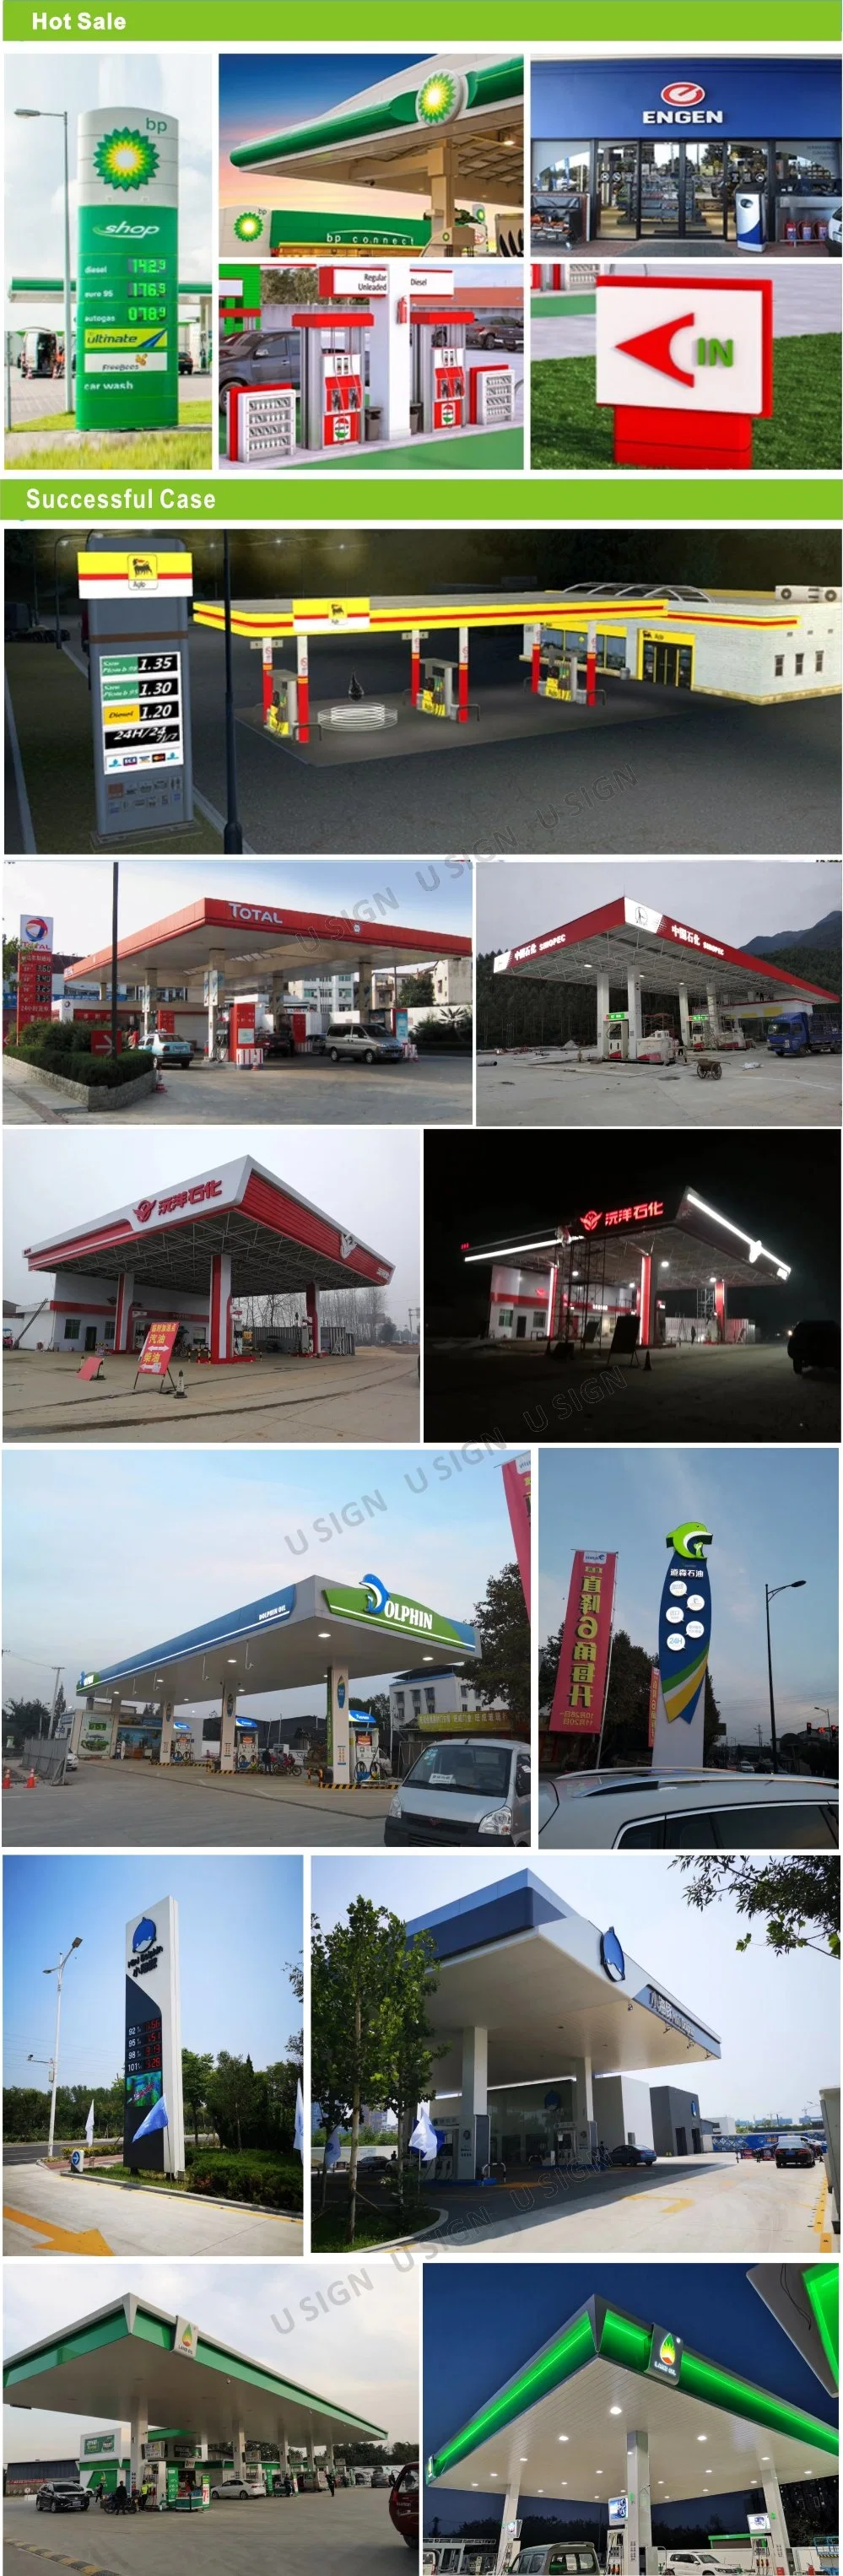 Pavement Outdoor Advertising Floor Type Free Standing Signage Pylon Sign